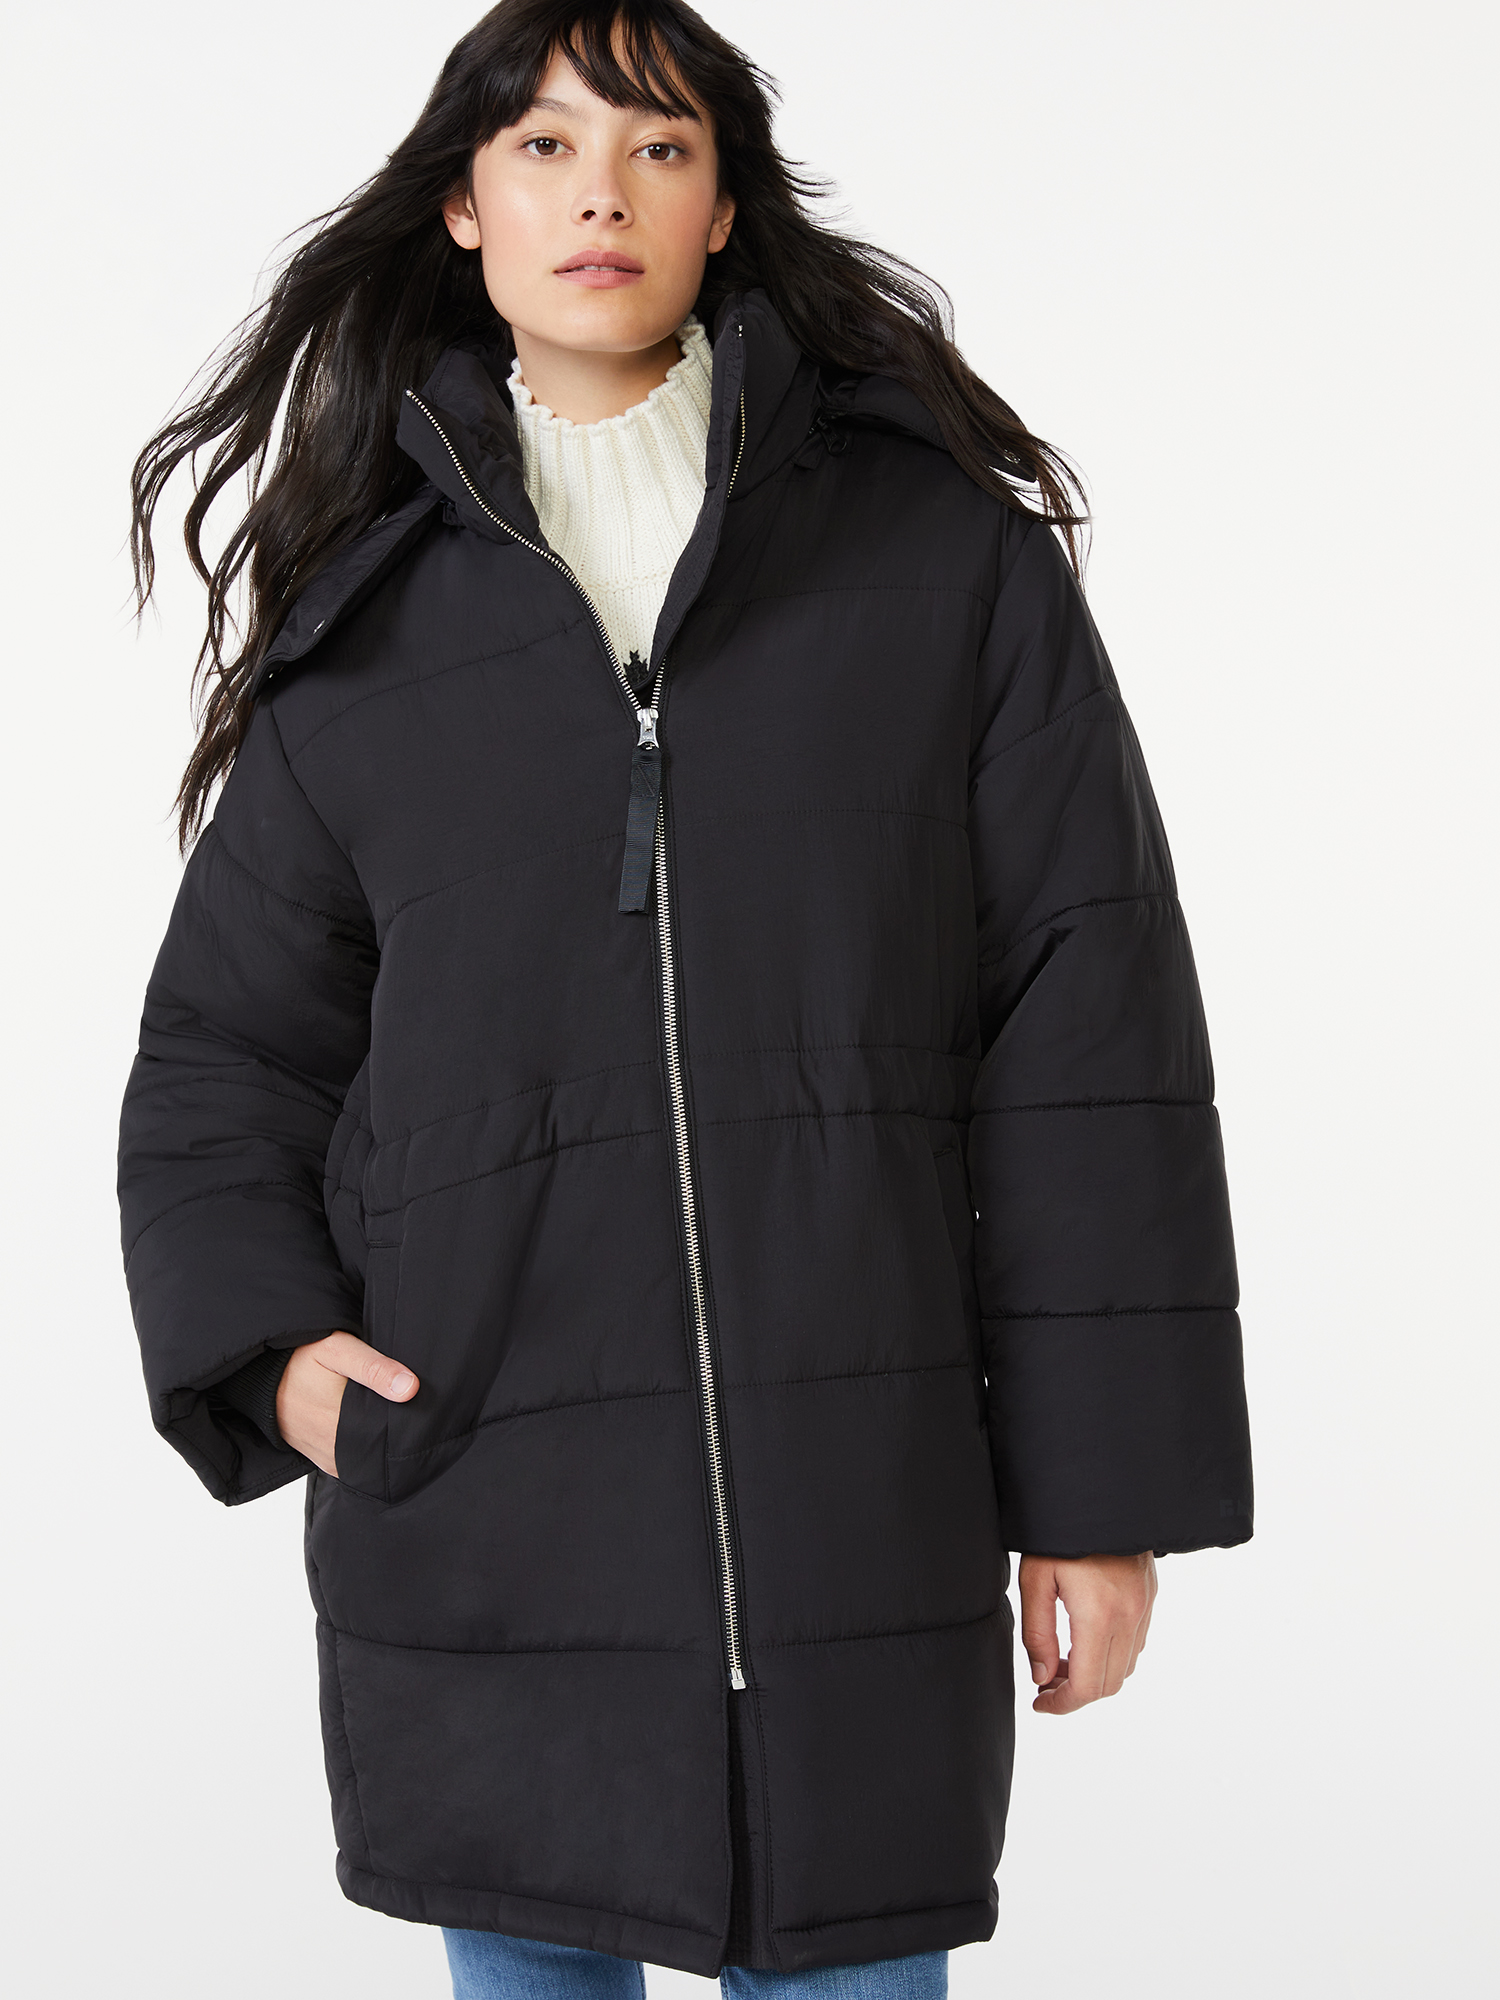 Free Assembly Women's Long Puffer Jacket, Midweight - image 1 of 5